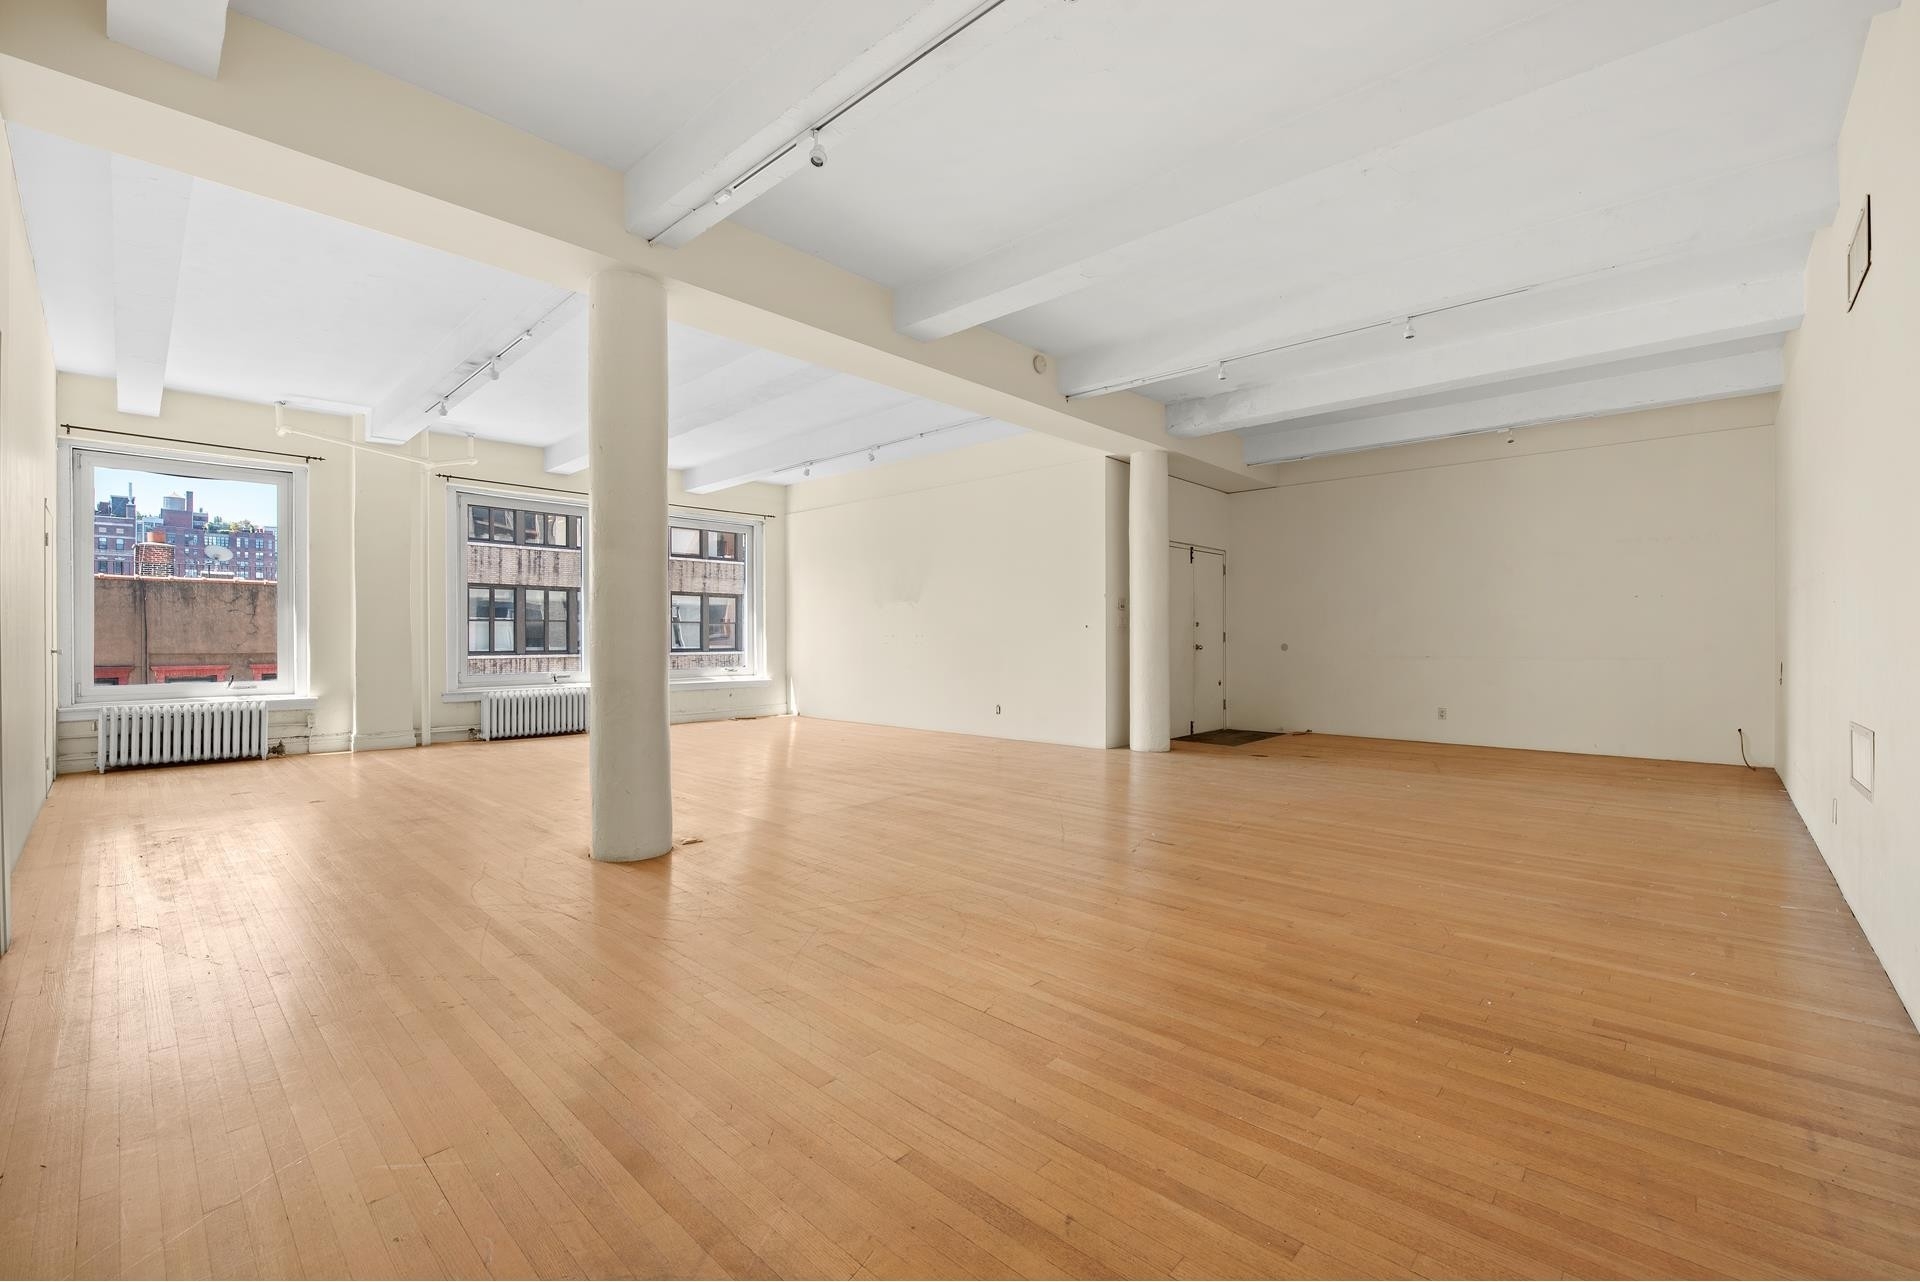 8. Co-op Properties for Sale at 227 W 17TH ST , 5 Chelsea, New York, New York 10011